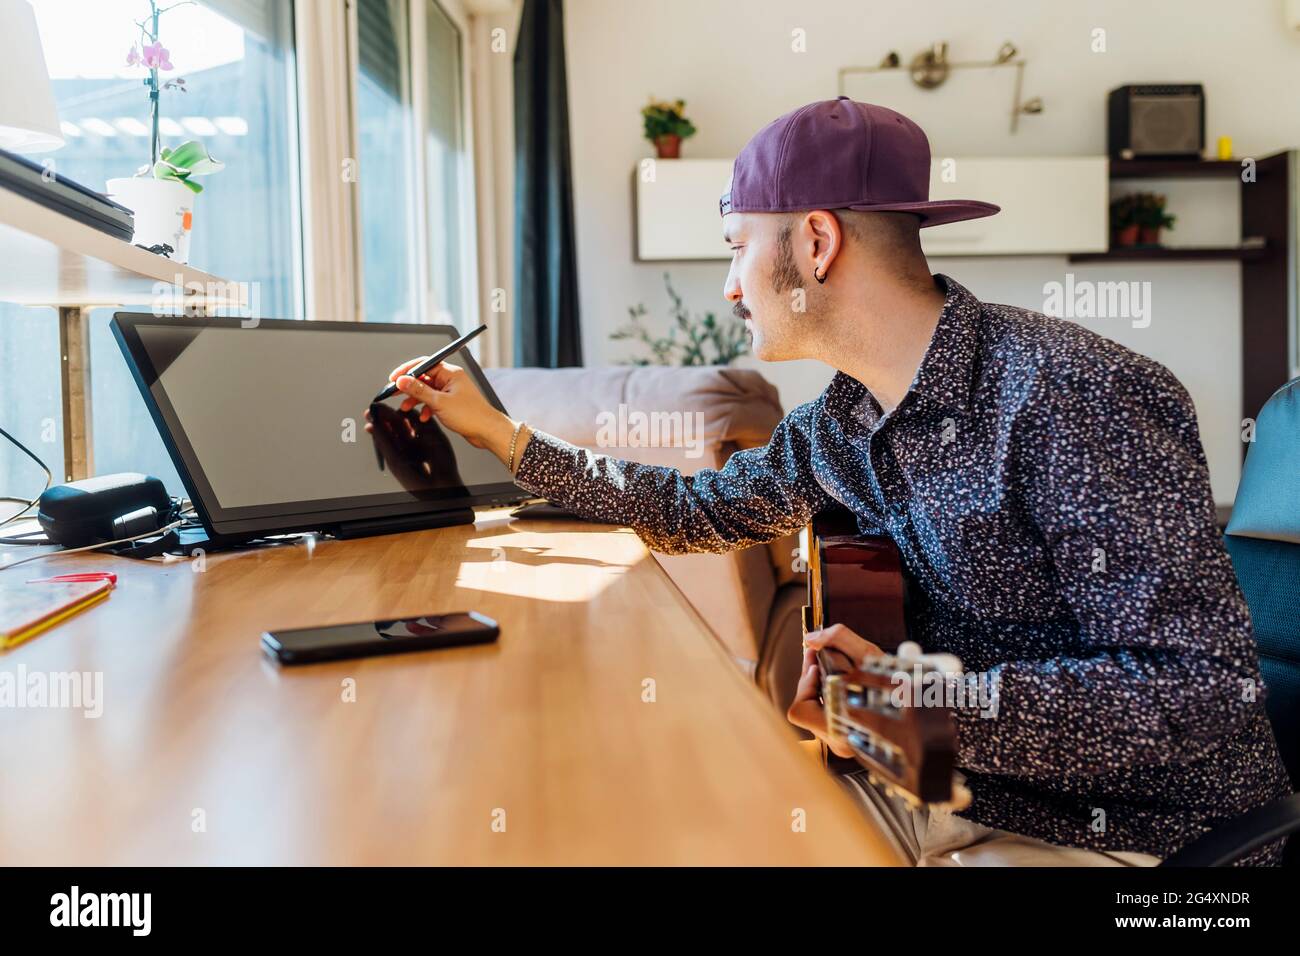 Young male composer with guitar using graphics tablet at home Stock Photo